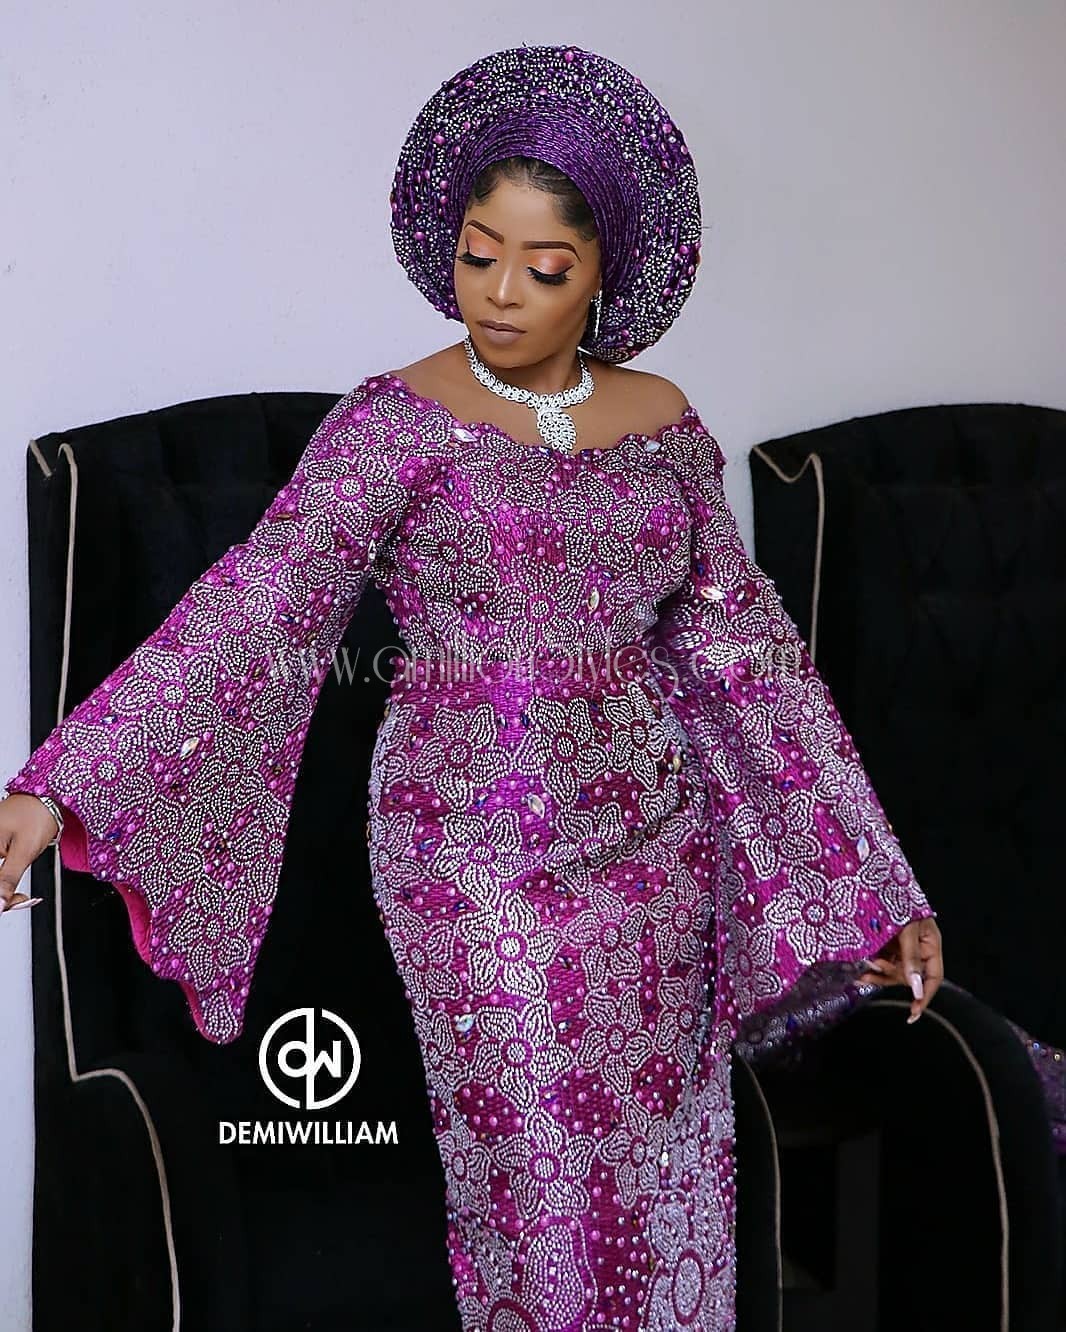 Here Are The Best Yoruba Traditional Wedding Attires You've Ever Seen!